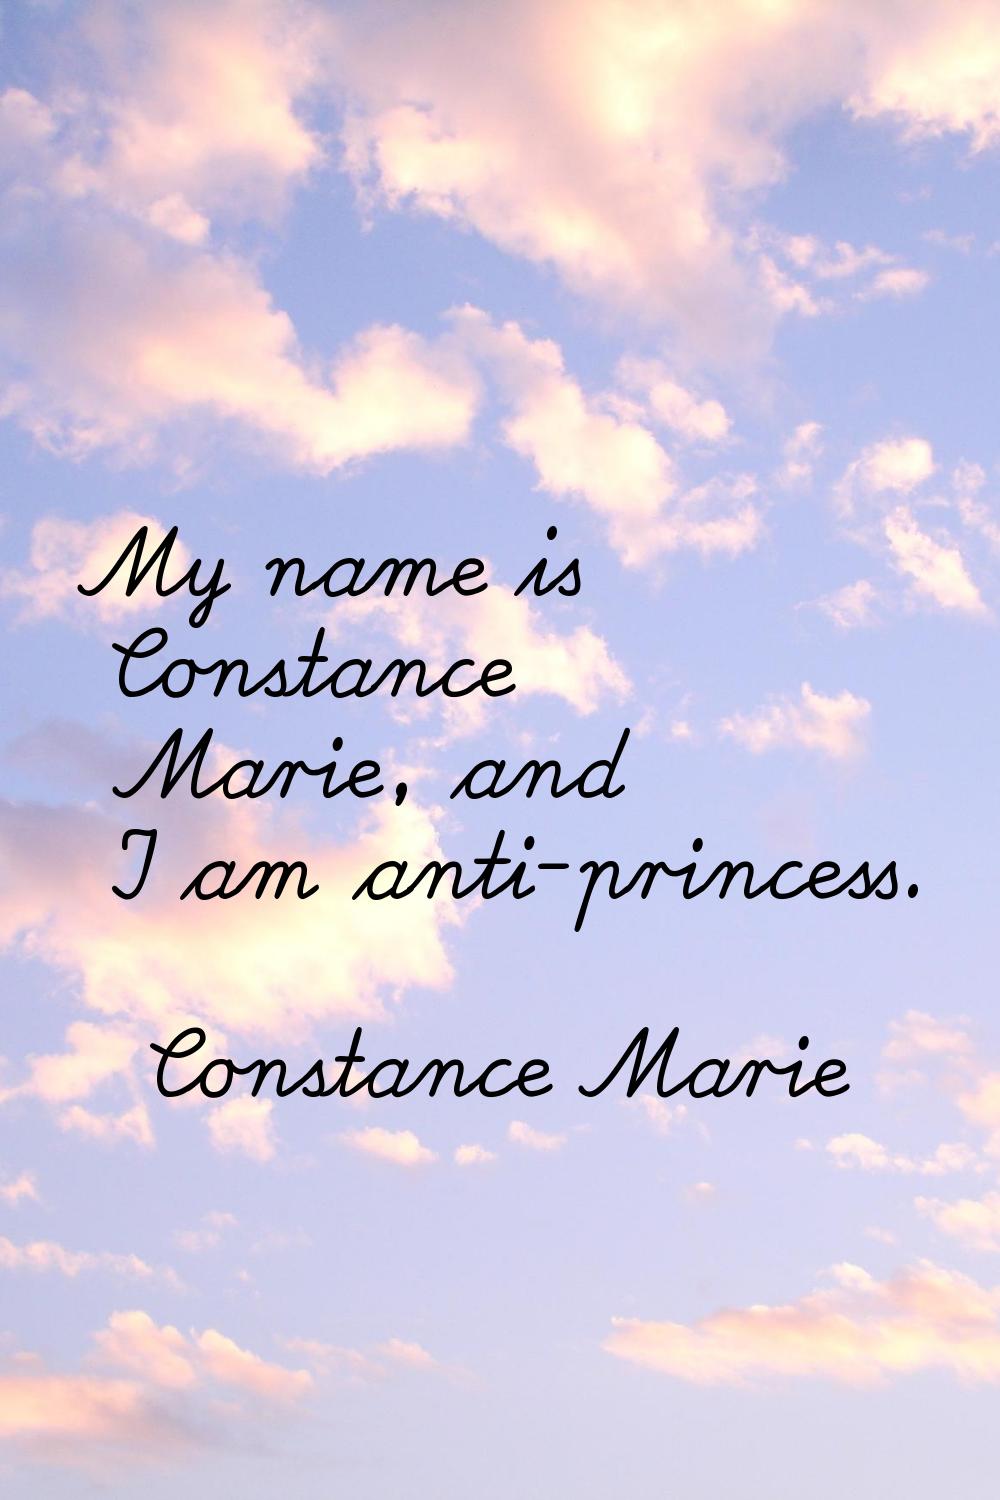 My name is Constance Marie, and I am anti-princess.